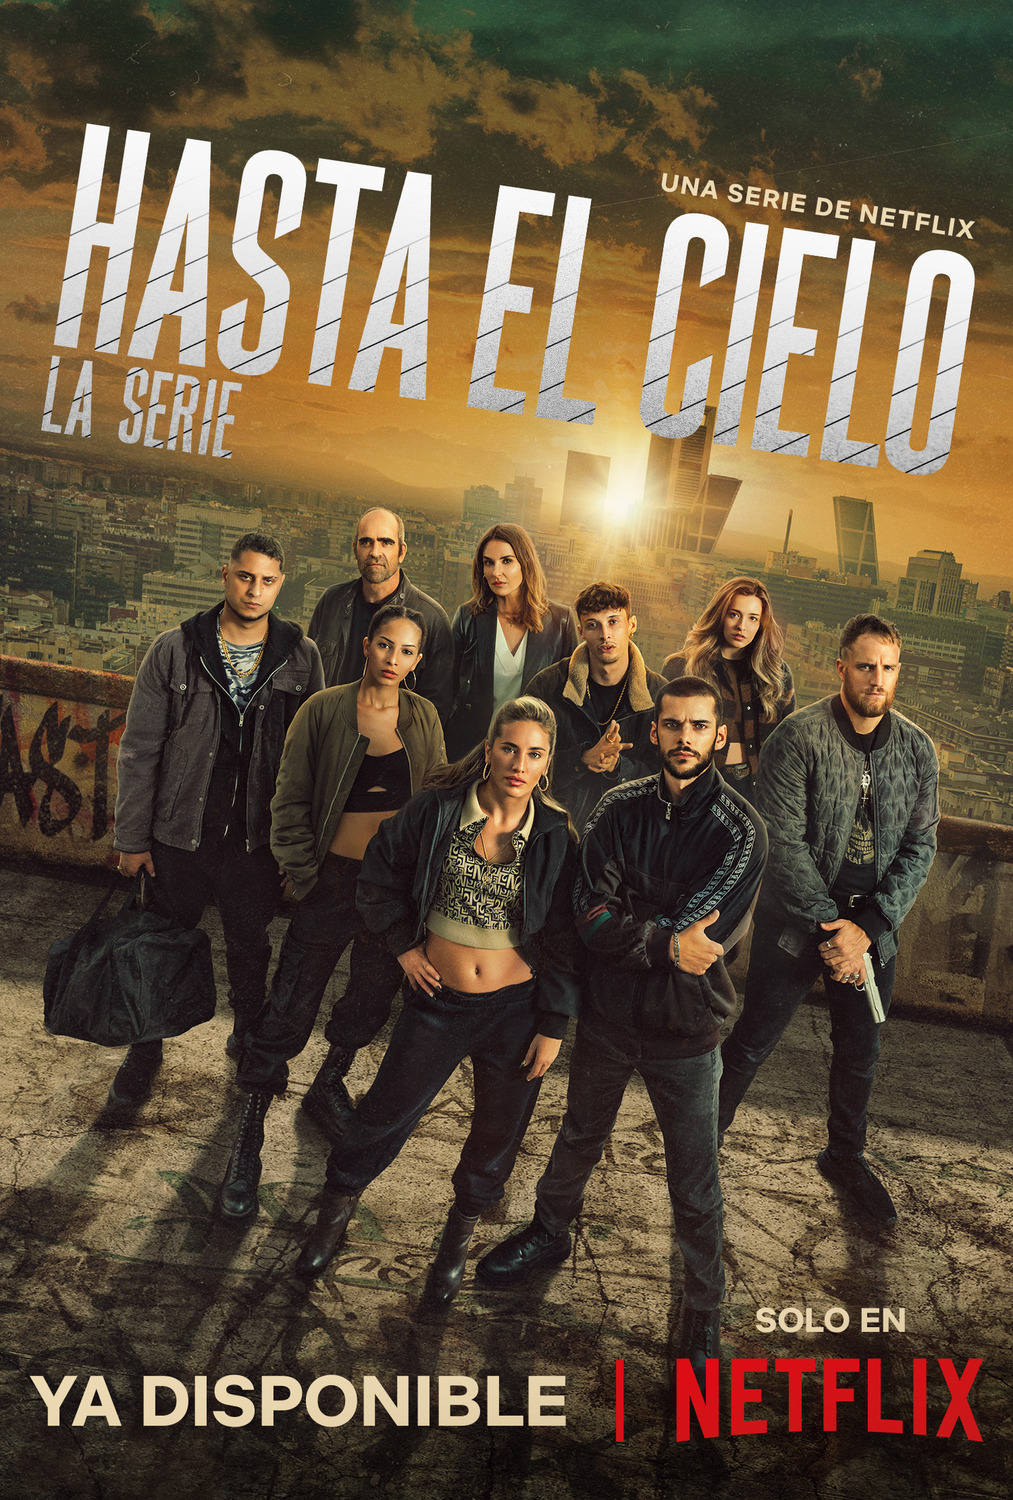 Extra Large TV Poster Image for Hasta el cielo: La serie (#1 of 7)